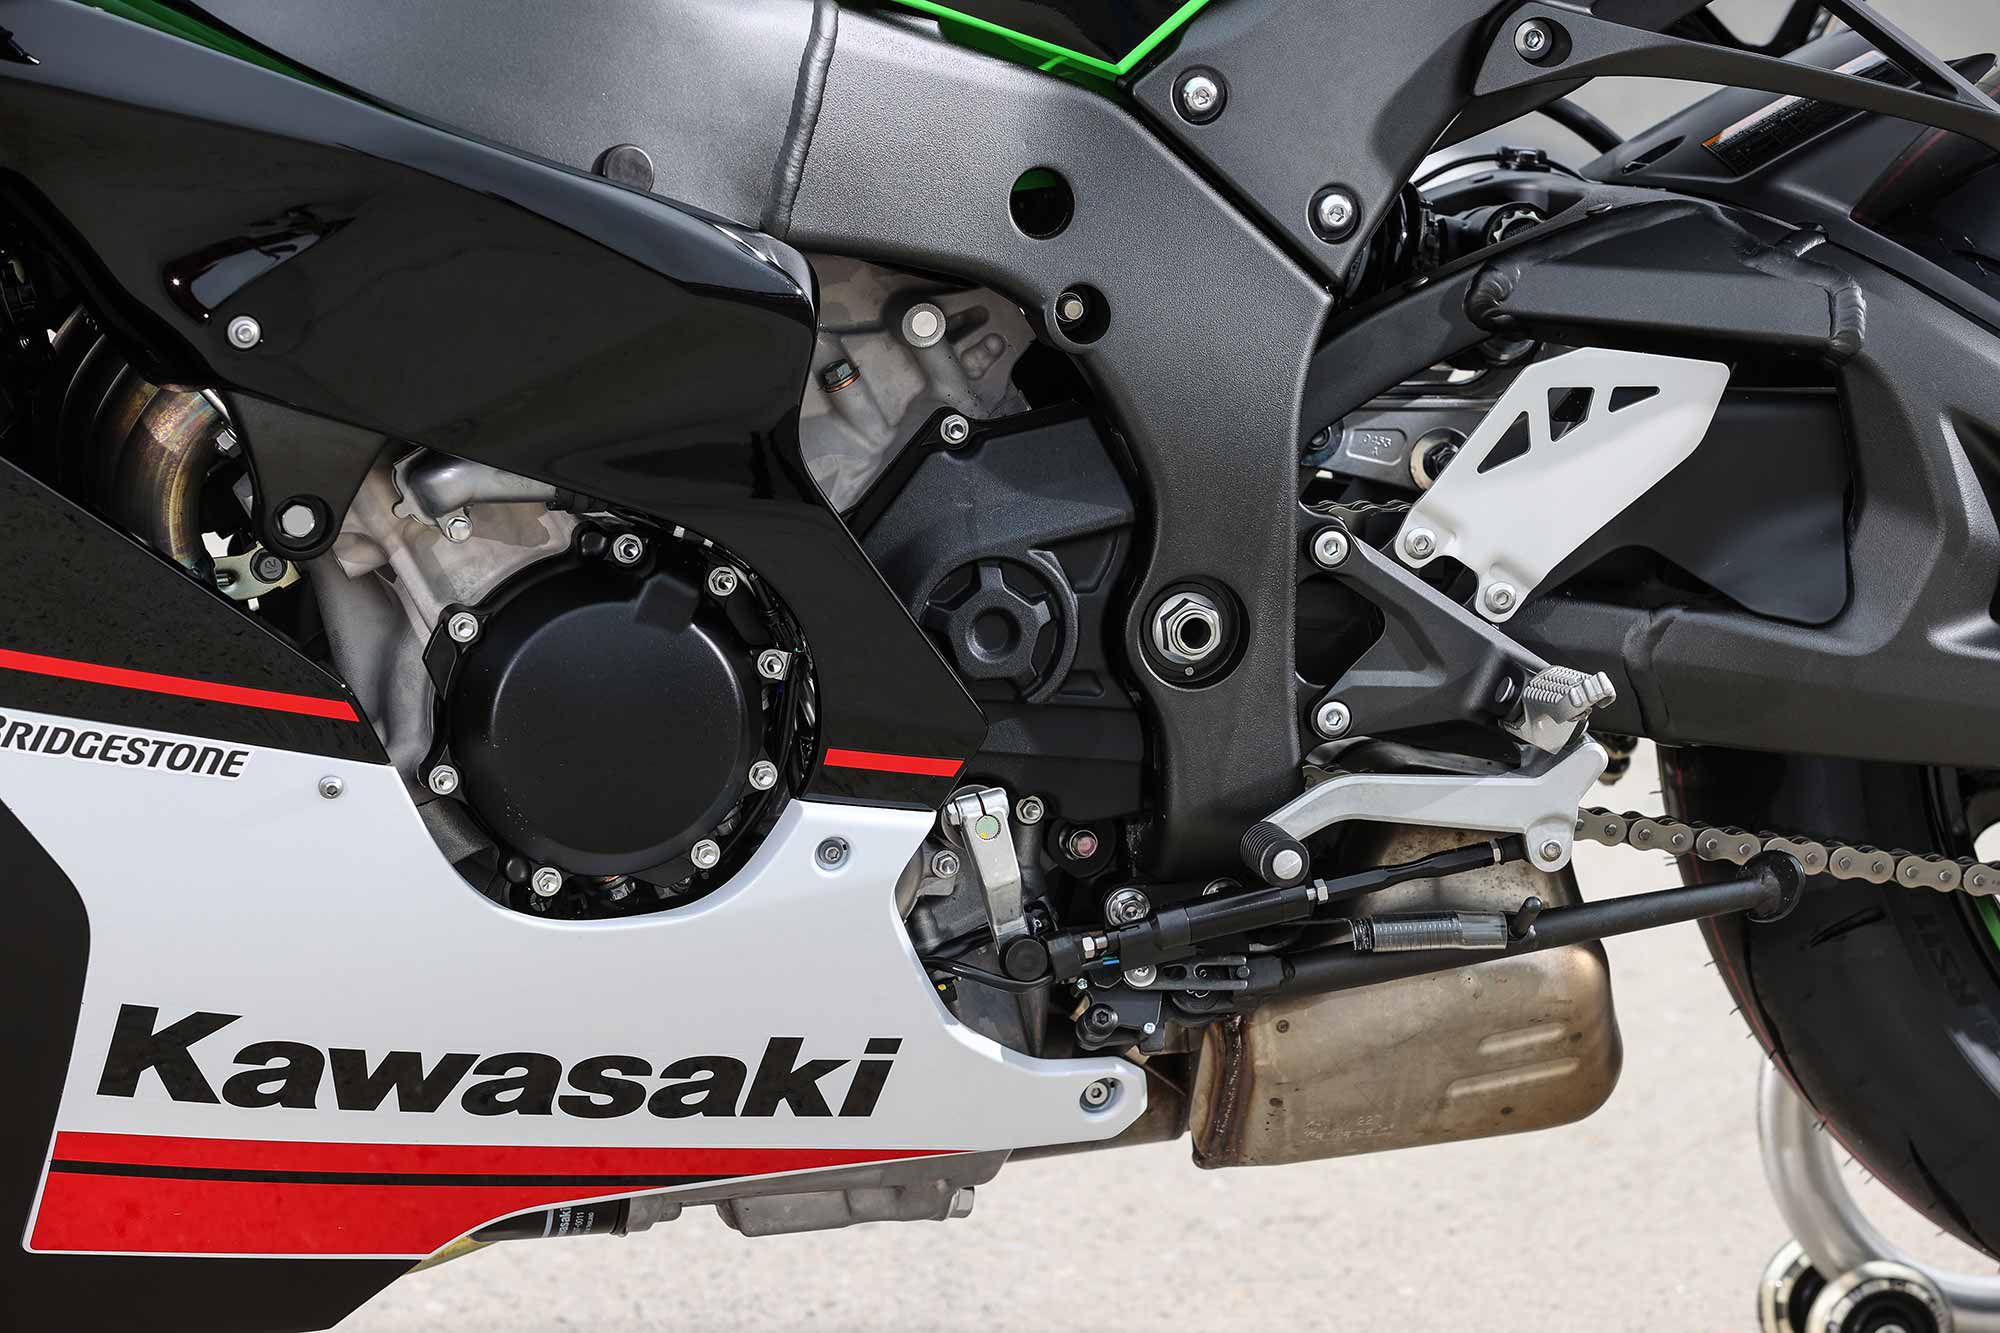 The internal gear ratios of the Ninja’s six-speed transmission have been optimized for stronger acceleration. The bidirectional quickshifter makes for seamless action while toeing through the gearbox.